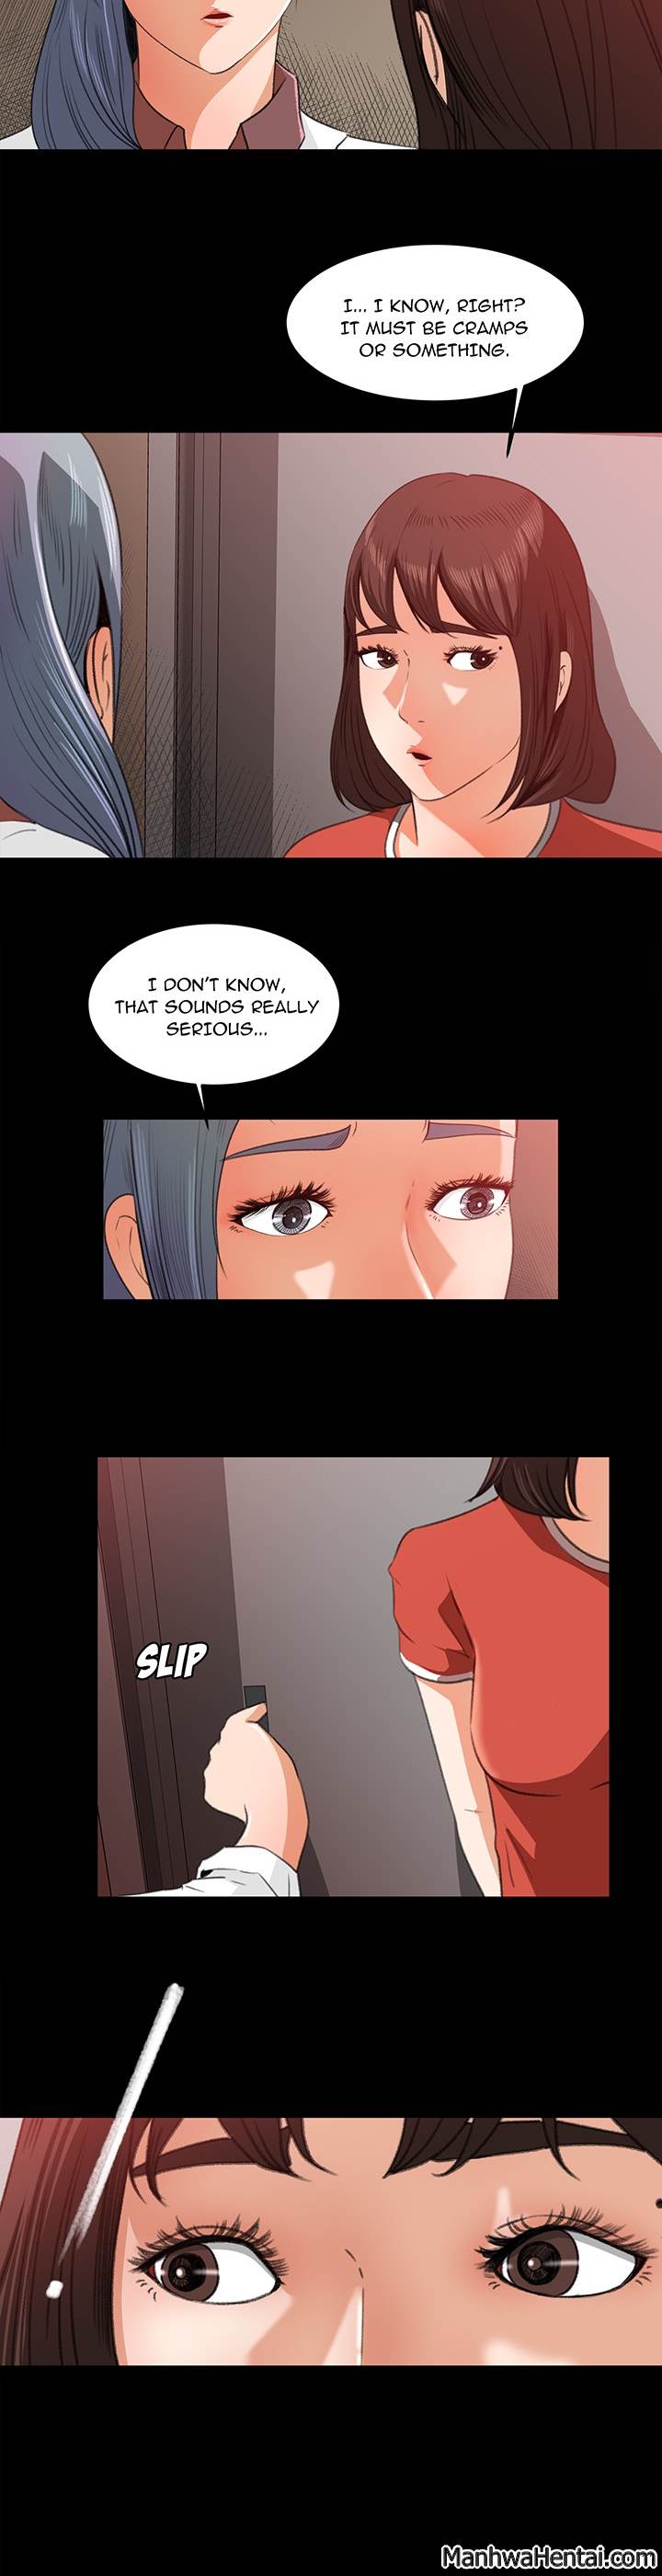 Inside the Uniform - Chapter 14 Page 6